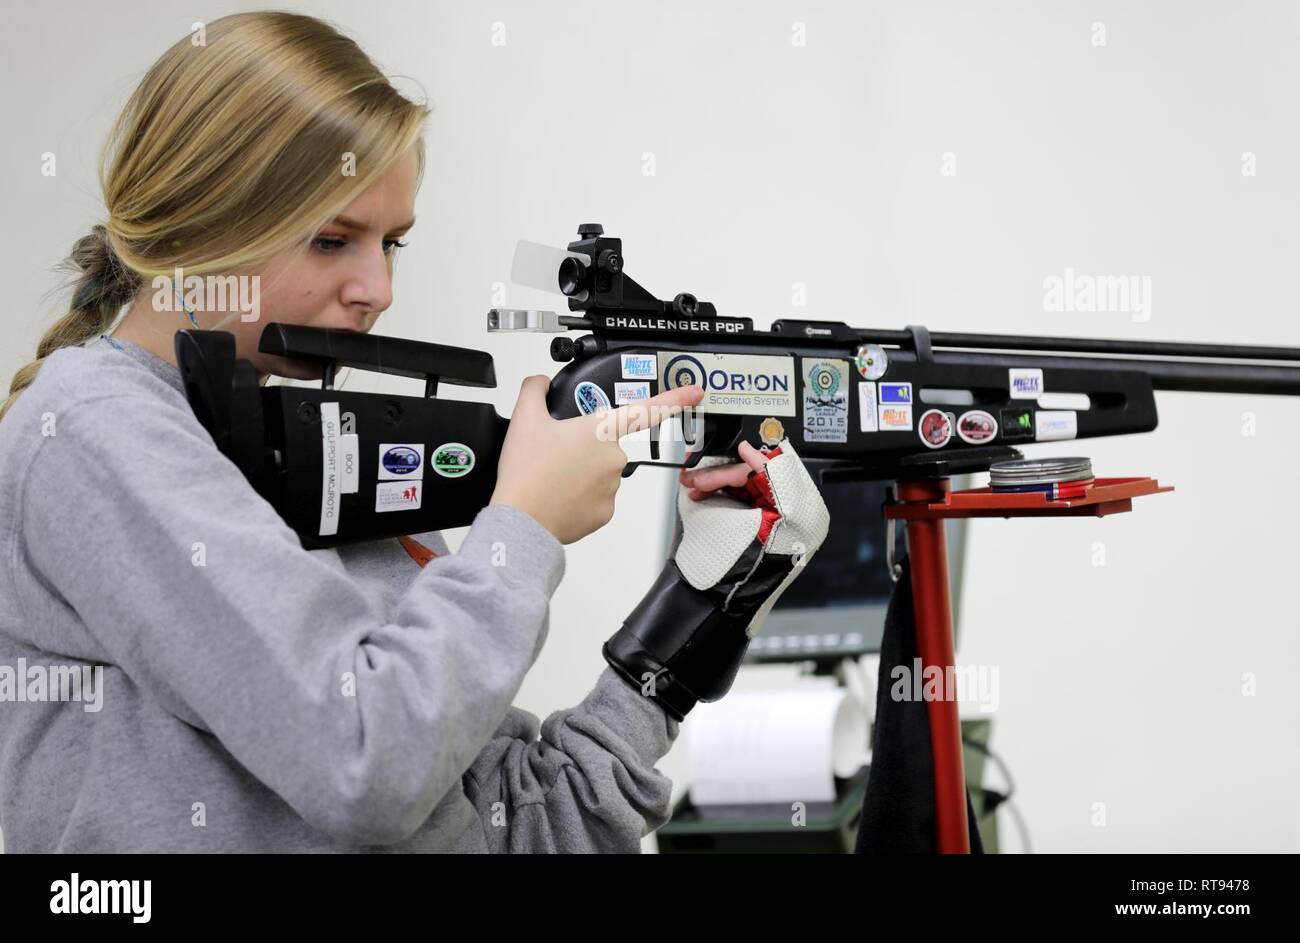 Mackayla Bourgeois, a junior sporter competitor at the U.S. Army Junior Rifle National Championships at Fort Benning, Georgia, prepares for her next shot in the relay on January 25, 2019. The three-day, invitation-only event had the youth athletes compete side by side for top individual and team honors in three-position smallbore, sporter rifle and precision rifle. Bourgeois made the Sporter Finals, which include the top eight scores from the relays, both days of the competition. Stock Photo